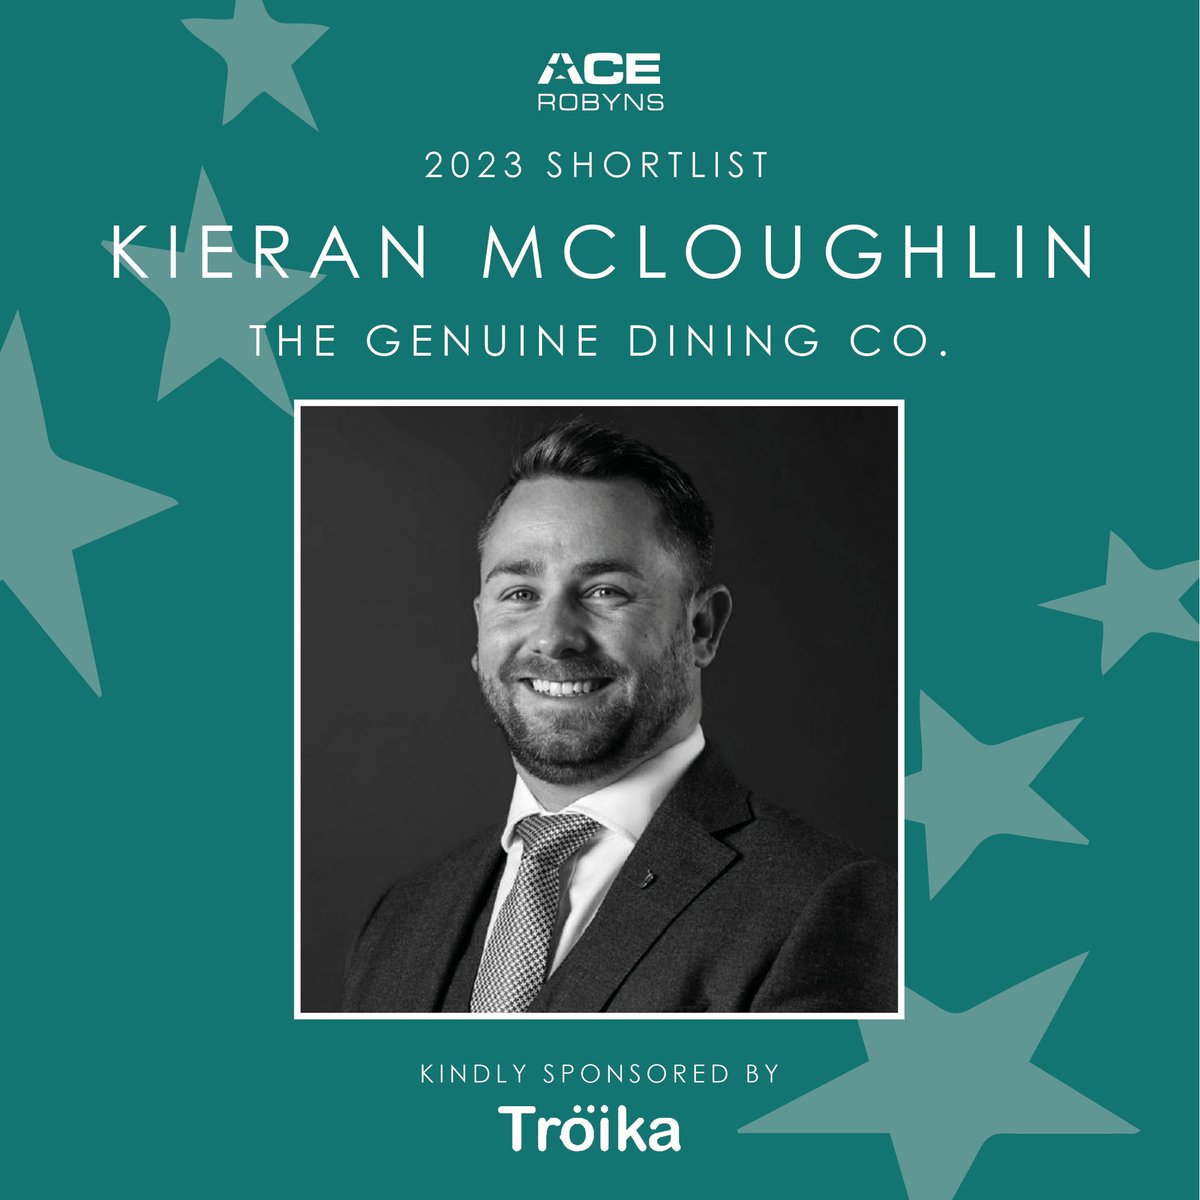 Congratulations to our 9th shortlisted ACE Robyn Kieran McLoughlin General Manager @GenuineDining see you on the 11th July for the awards and summer social at Bluefin. Thanks to our sponsors @Troikachat and our hosts @graysonsuk #acerobyns #acenetworking